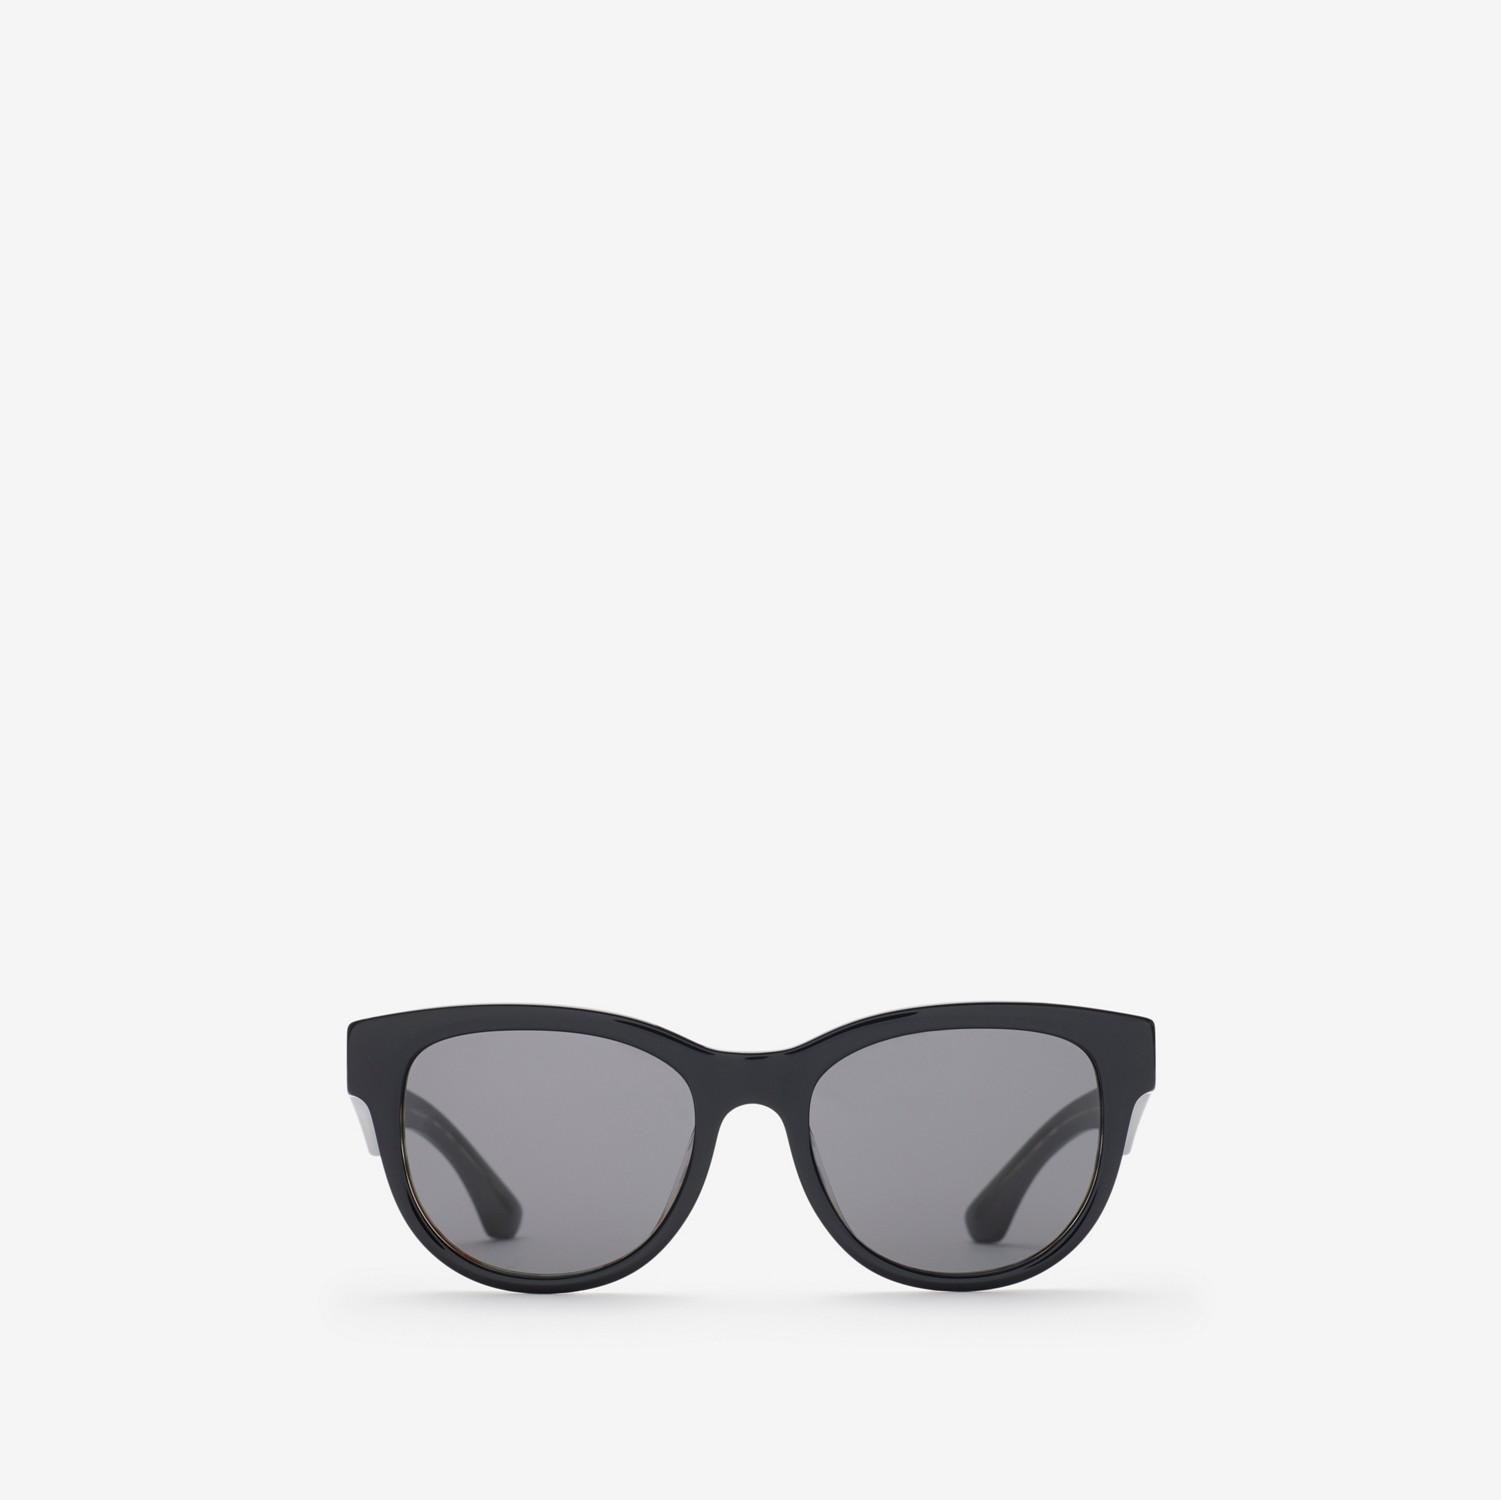 Check Round Sunglasses by BURBERRY